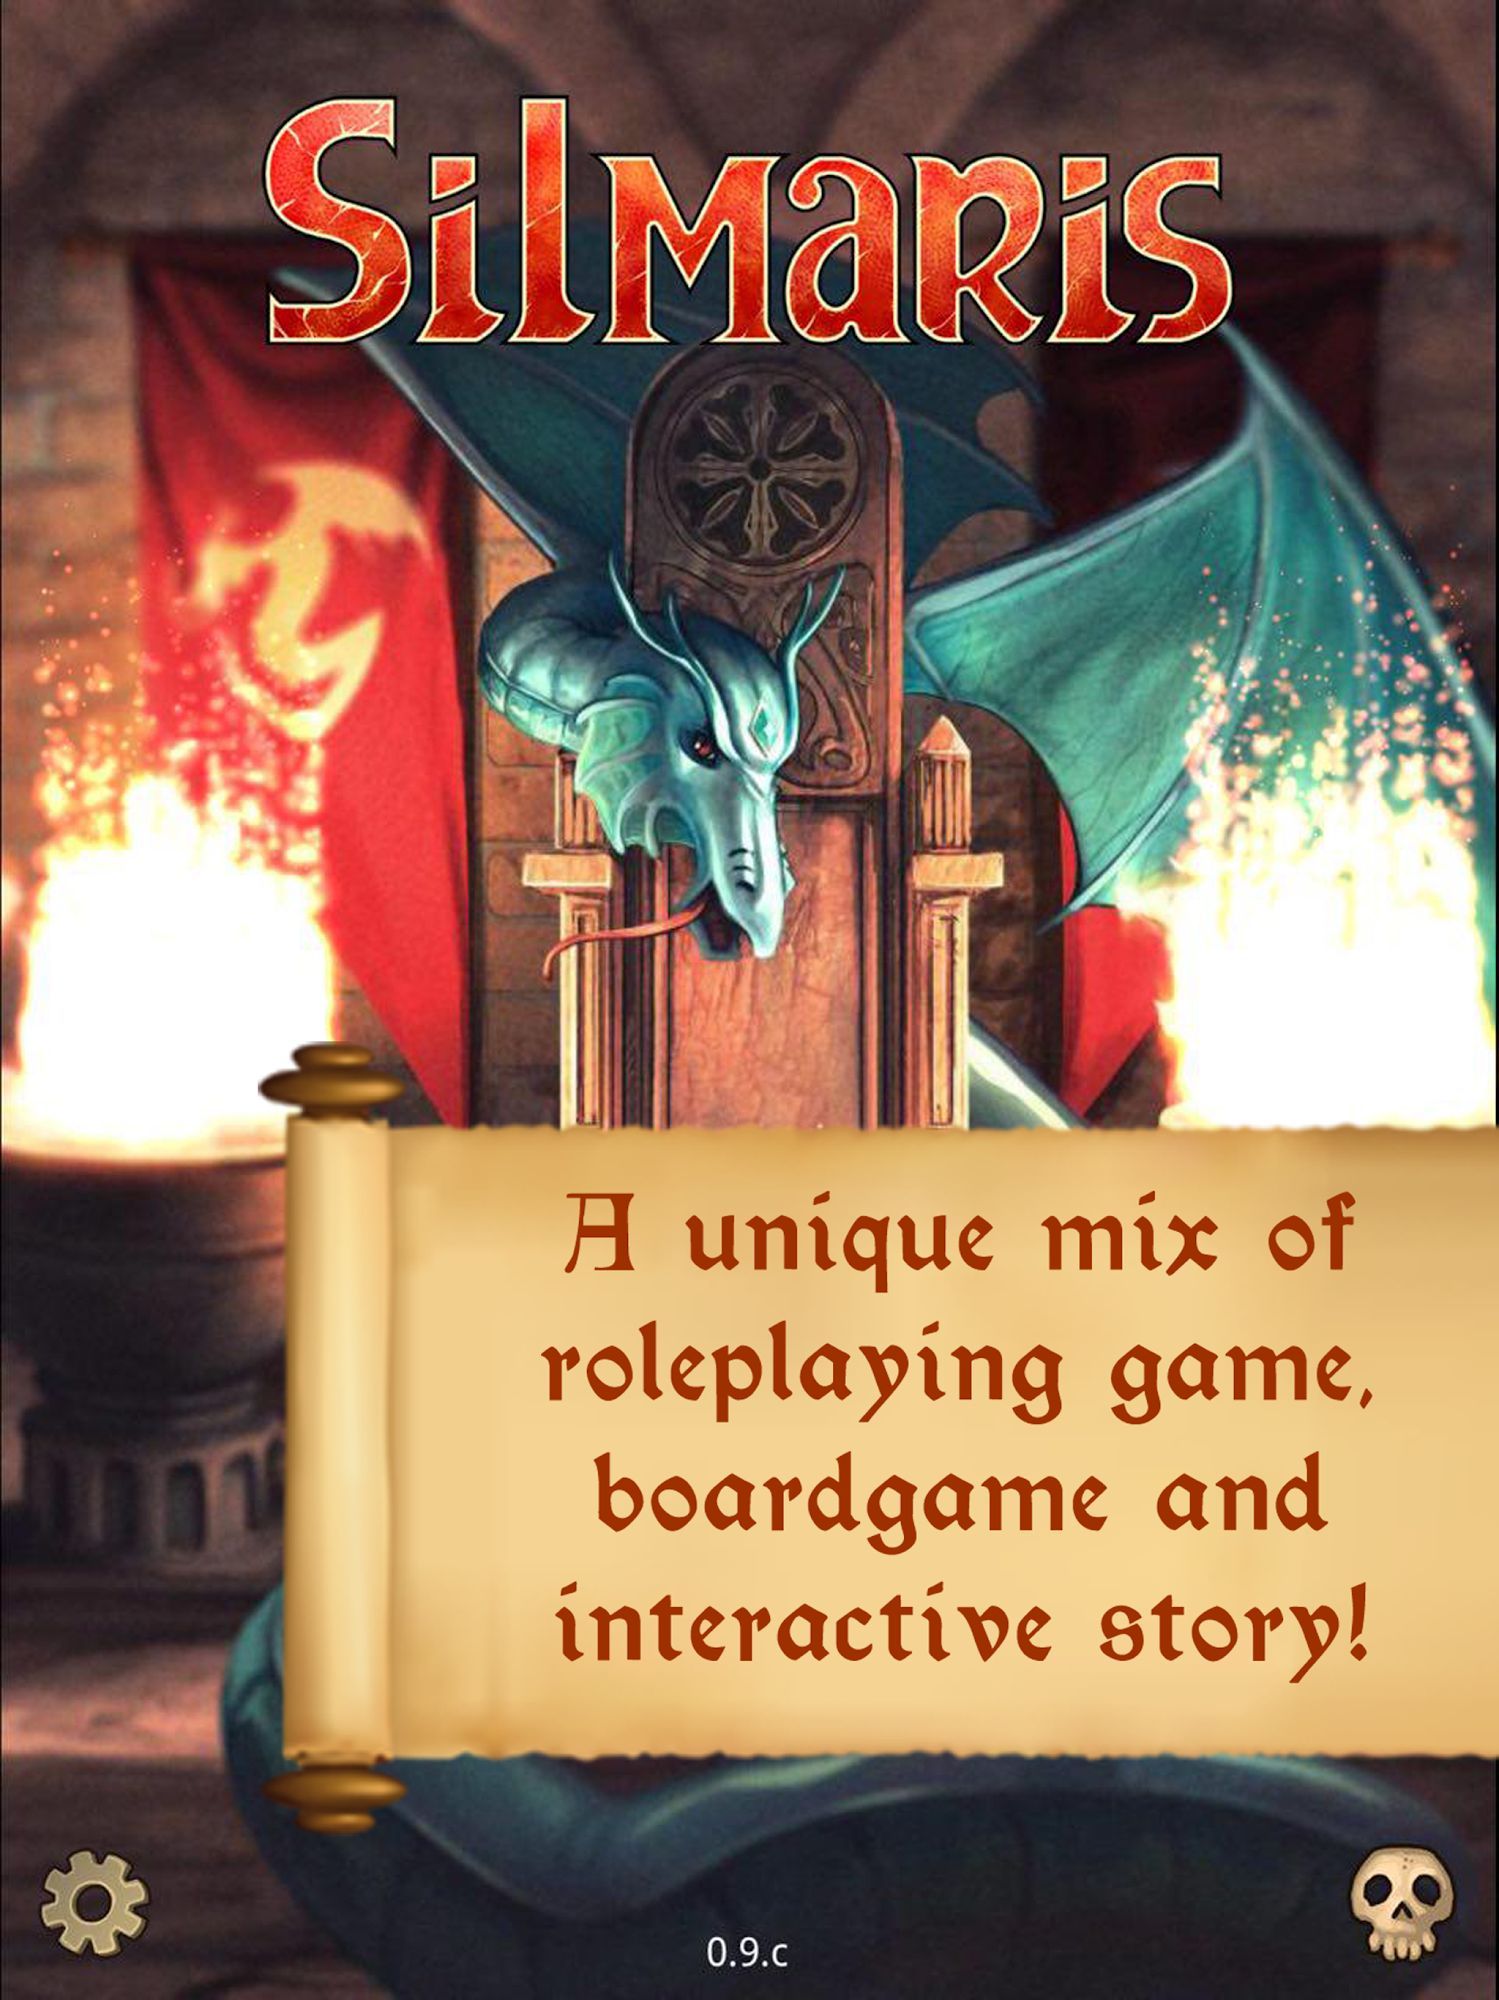 Silmaris - strategic boardgame and text adventures for Android